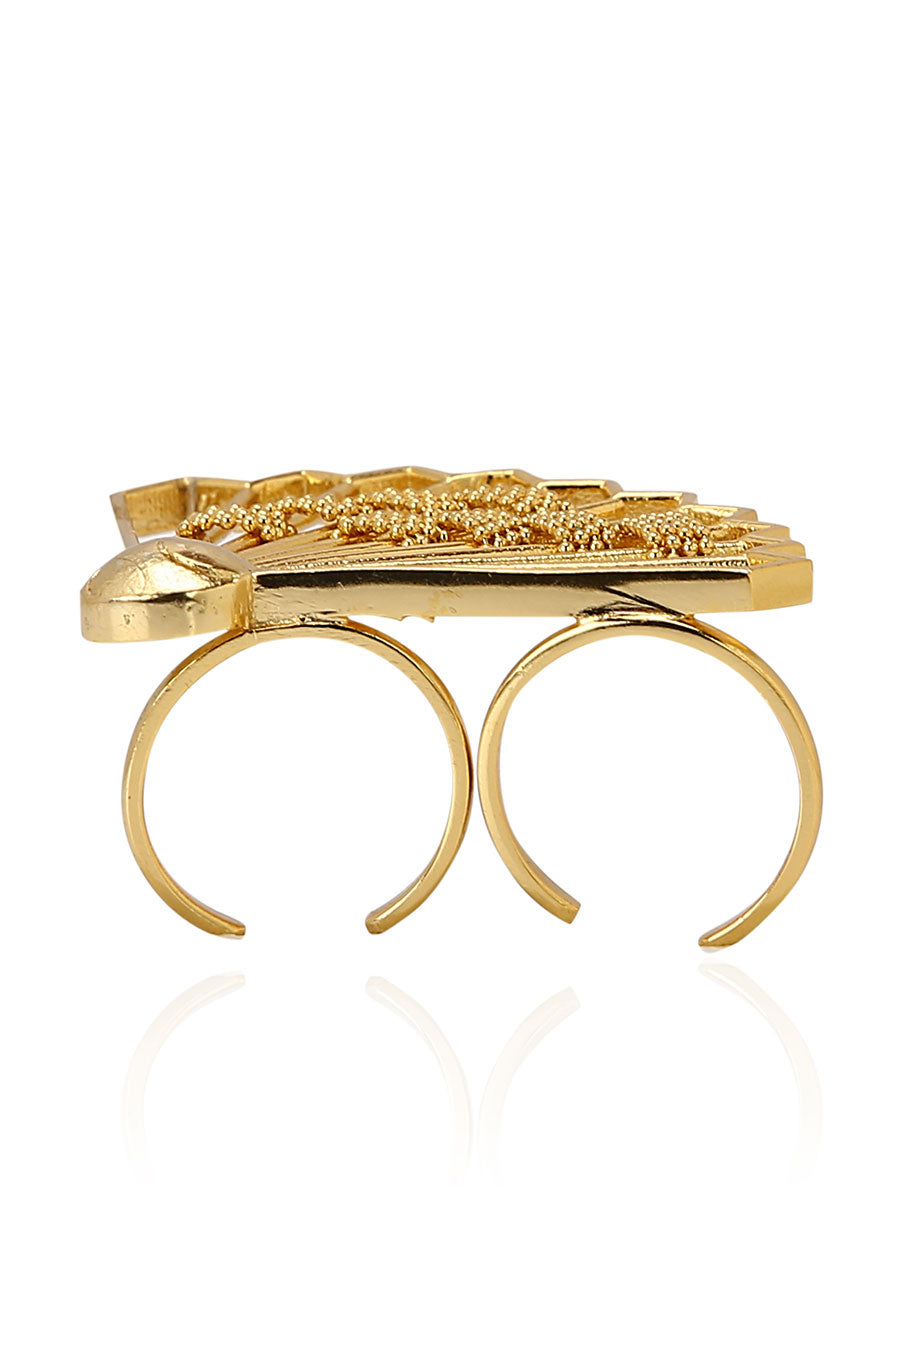 Shuttle Cock Shaped Gold Plated Ring